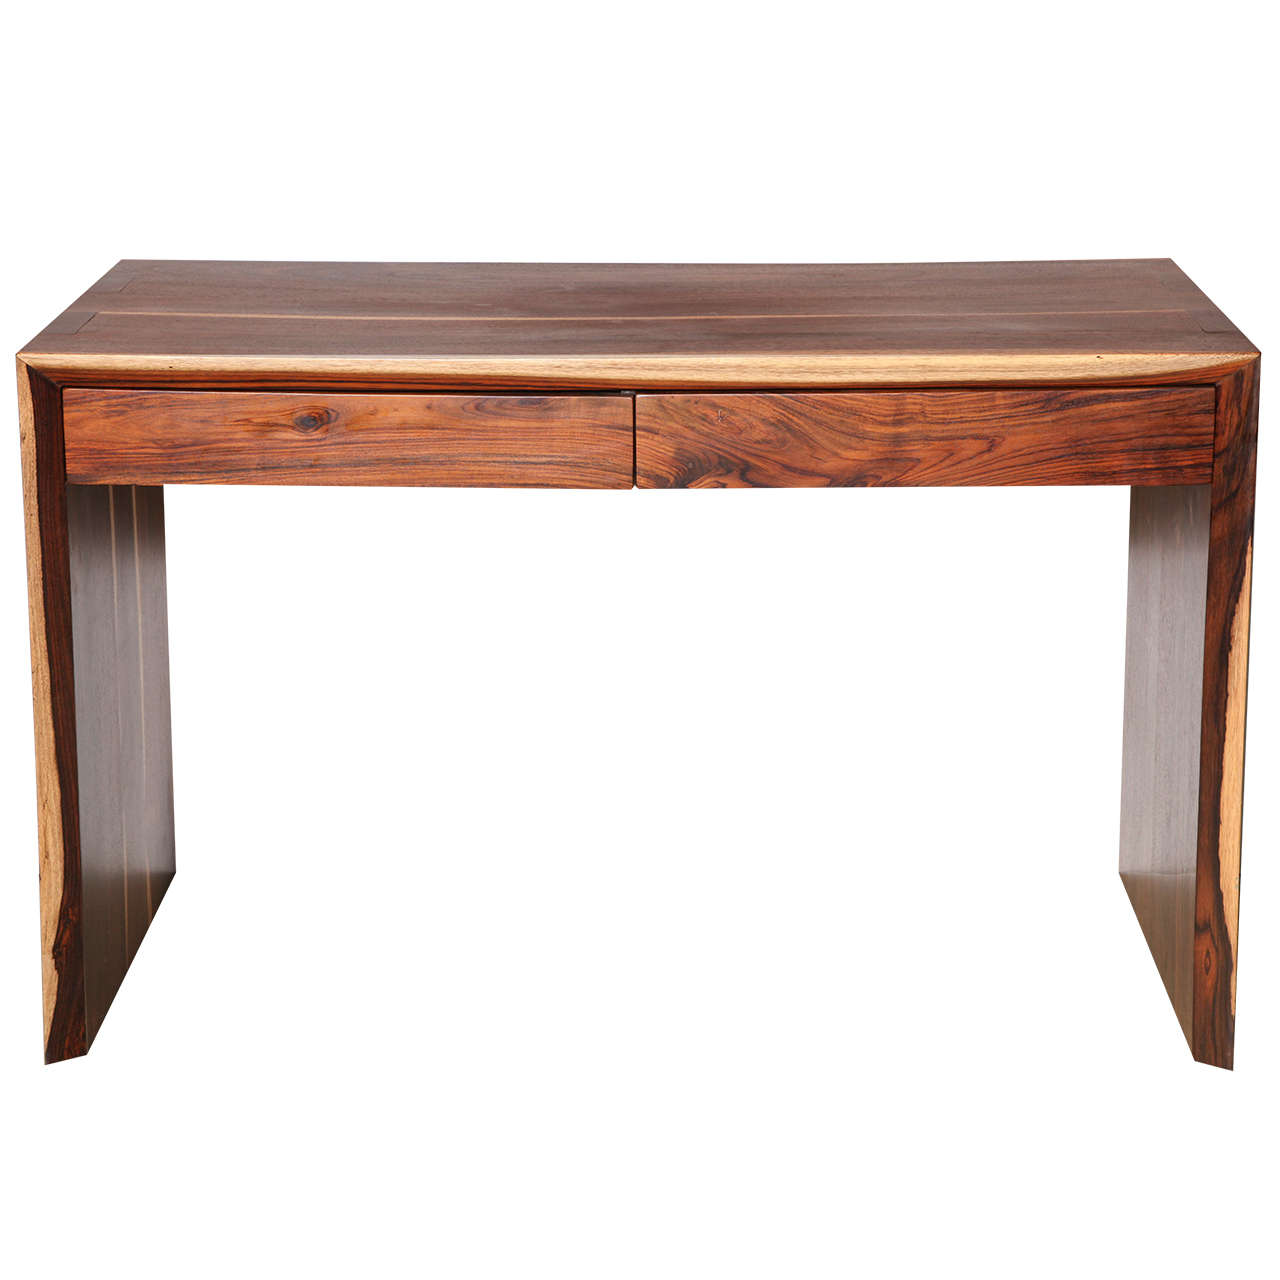 Craft Revival hand crafted Cocobolo Wood Desk